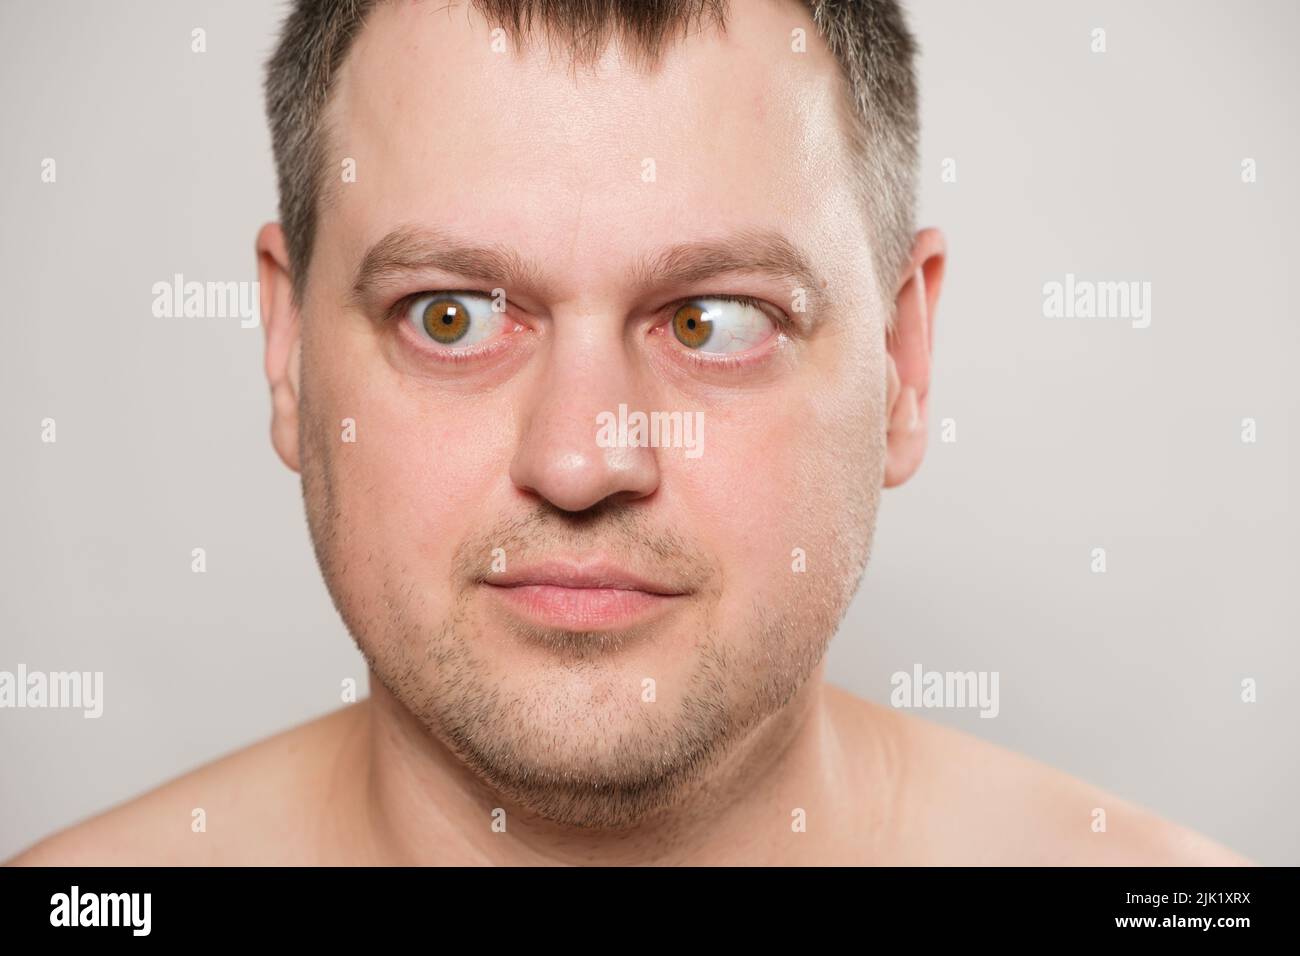 A man with strabismus squints his eyes on a white background Stock Photo